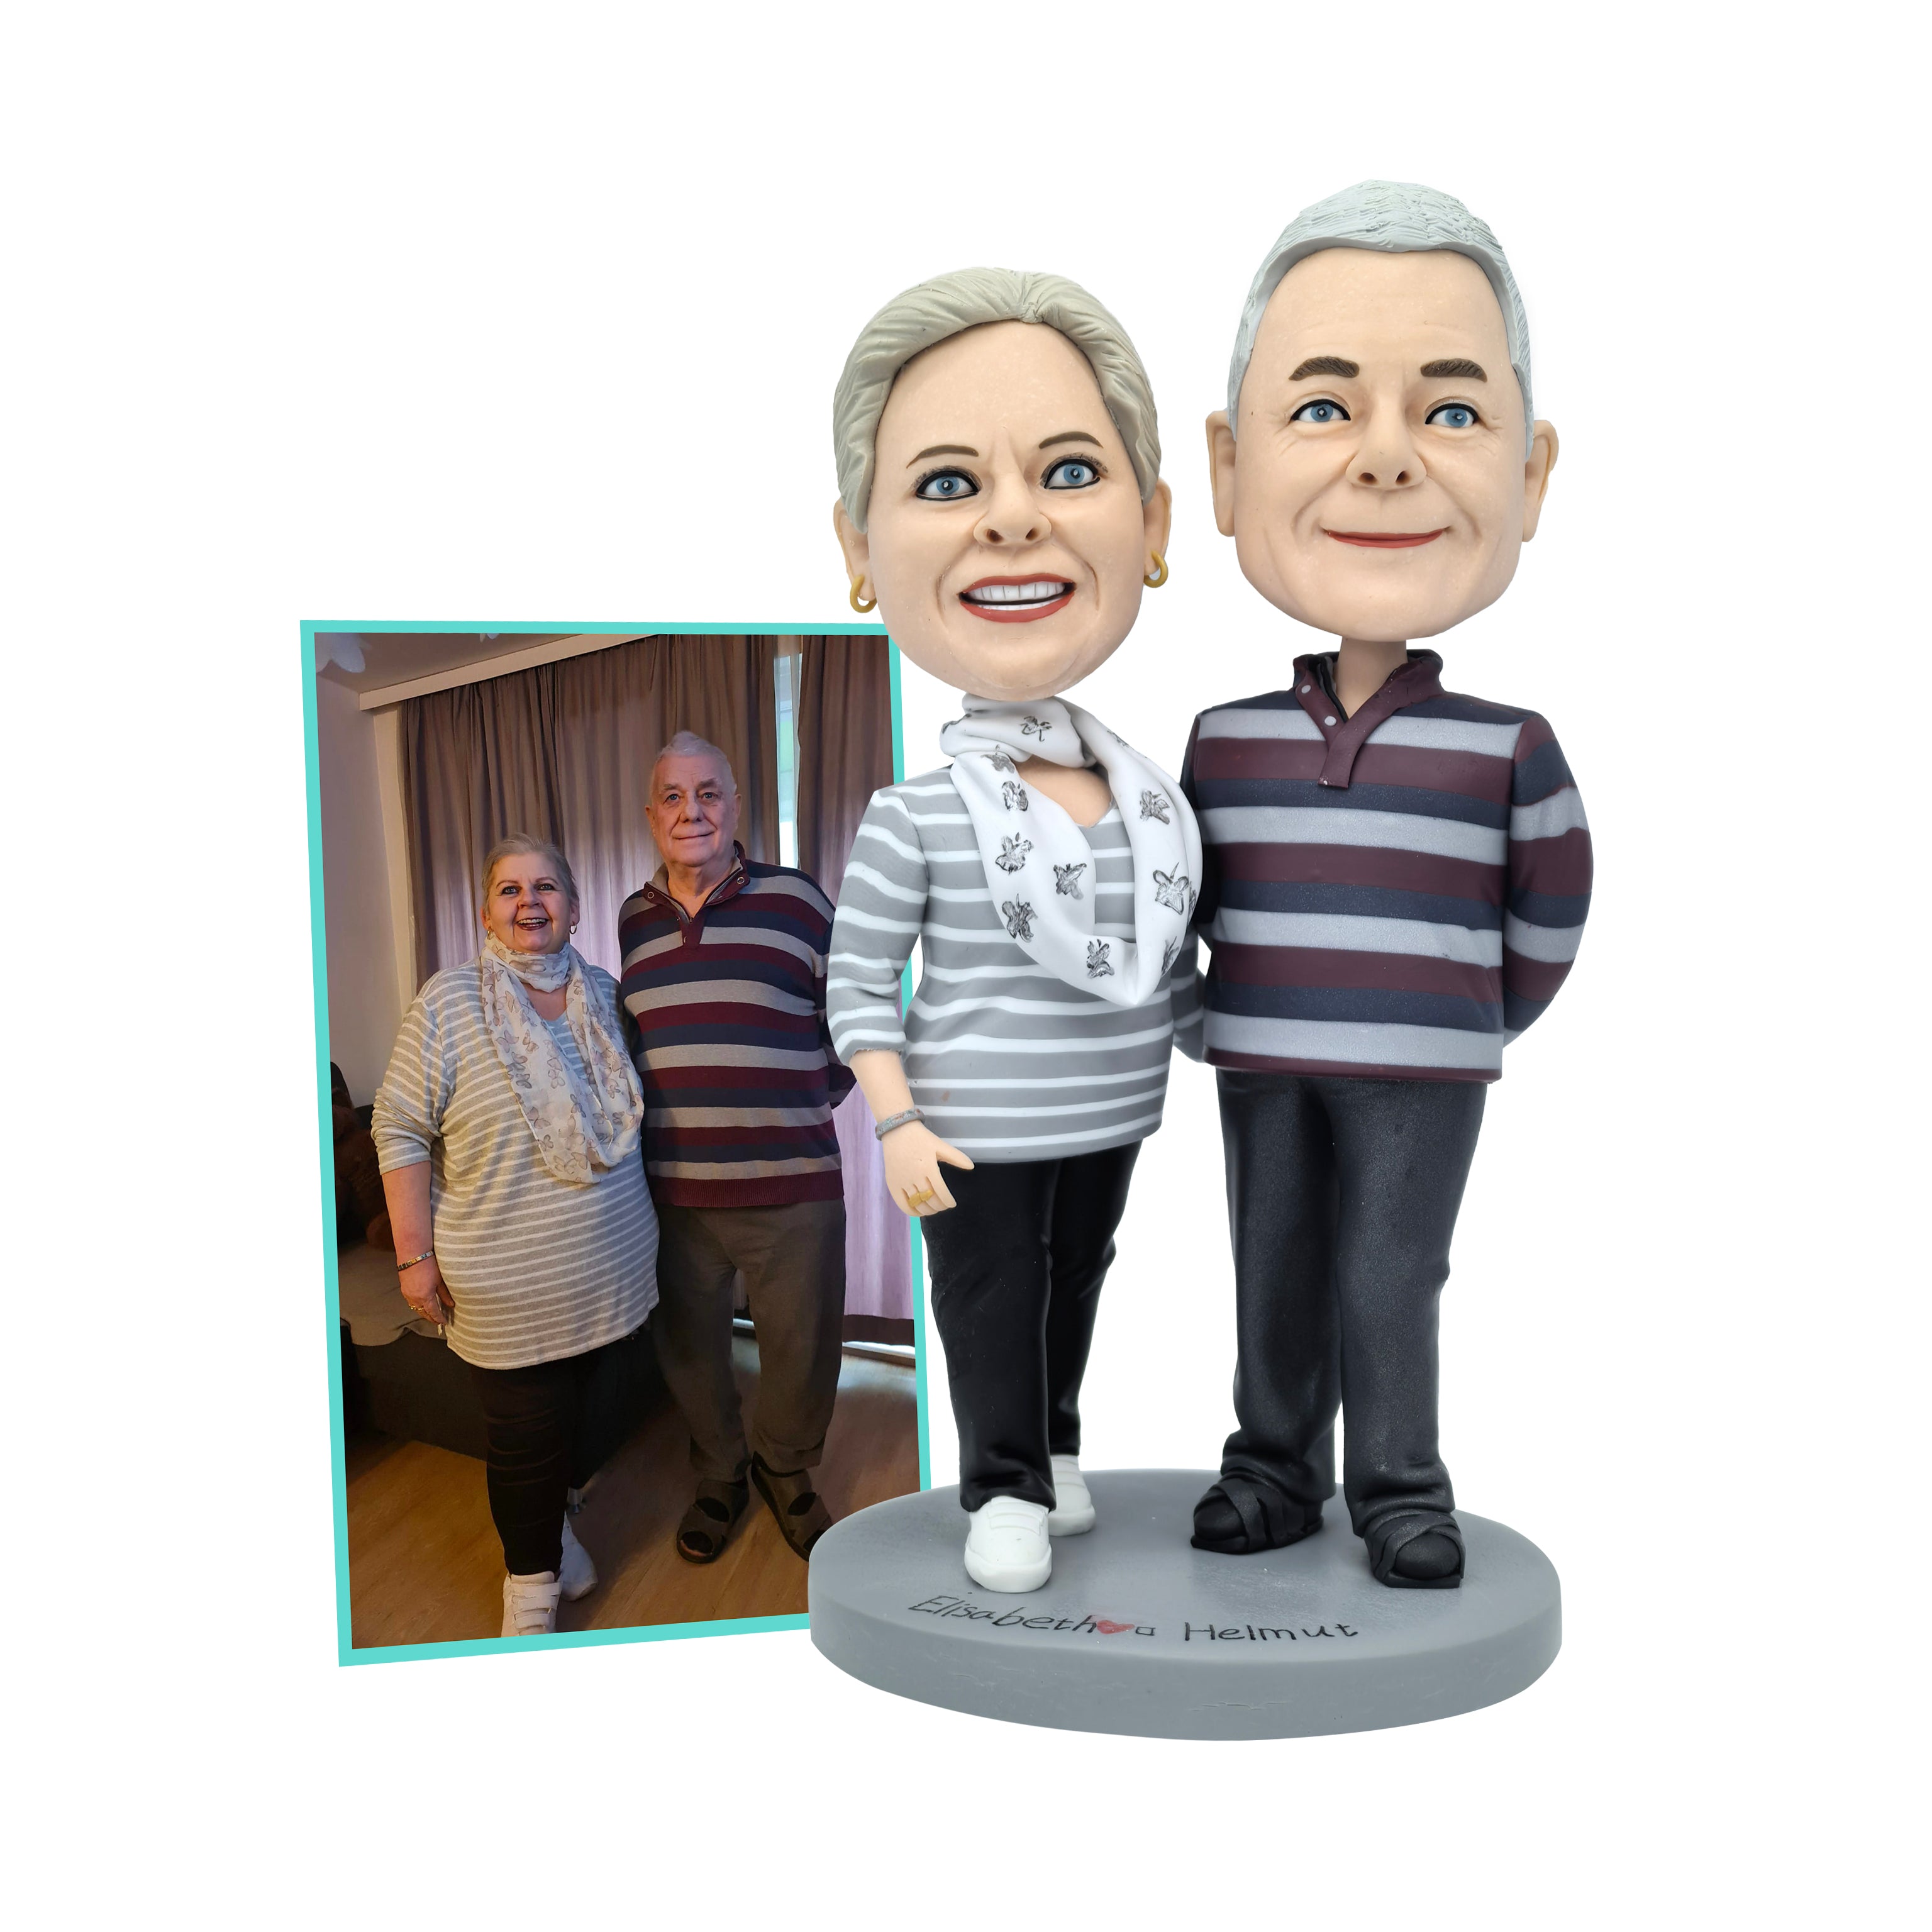 Customized bobbleheads for wedding anniversaries